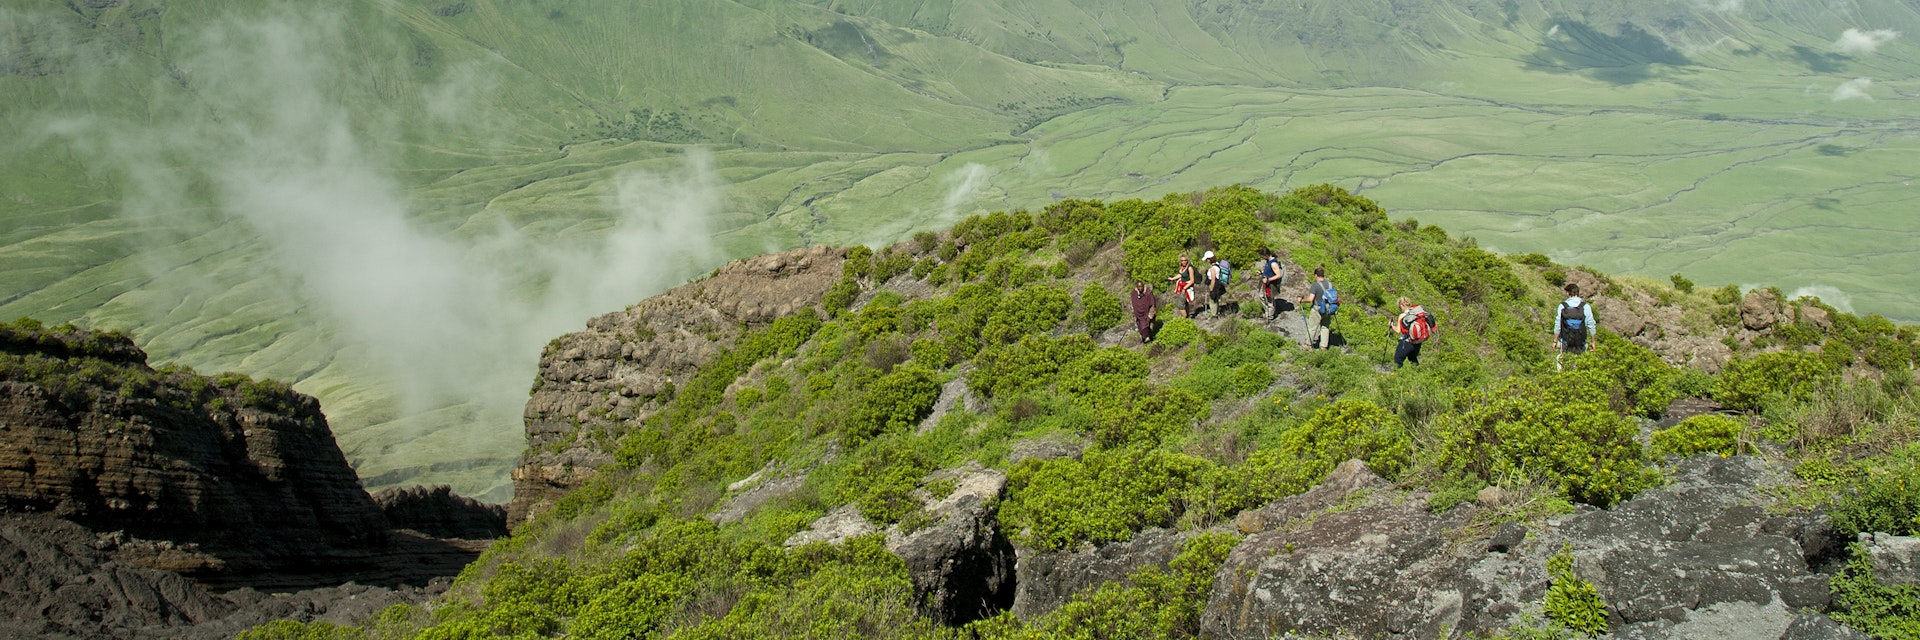 Ol Doinyo Lengai, Tanzania - January 1, 2007: A group of tourists is hiking down from the  top of Ol Doinyo Lengai into the green Rift Valley, in the background the Escarpment of the Rift Valley is visible. In the foreground there is some volcanic smoke coming out of a crack.